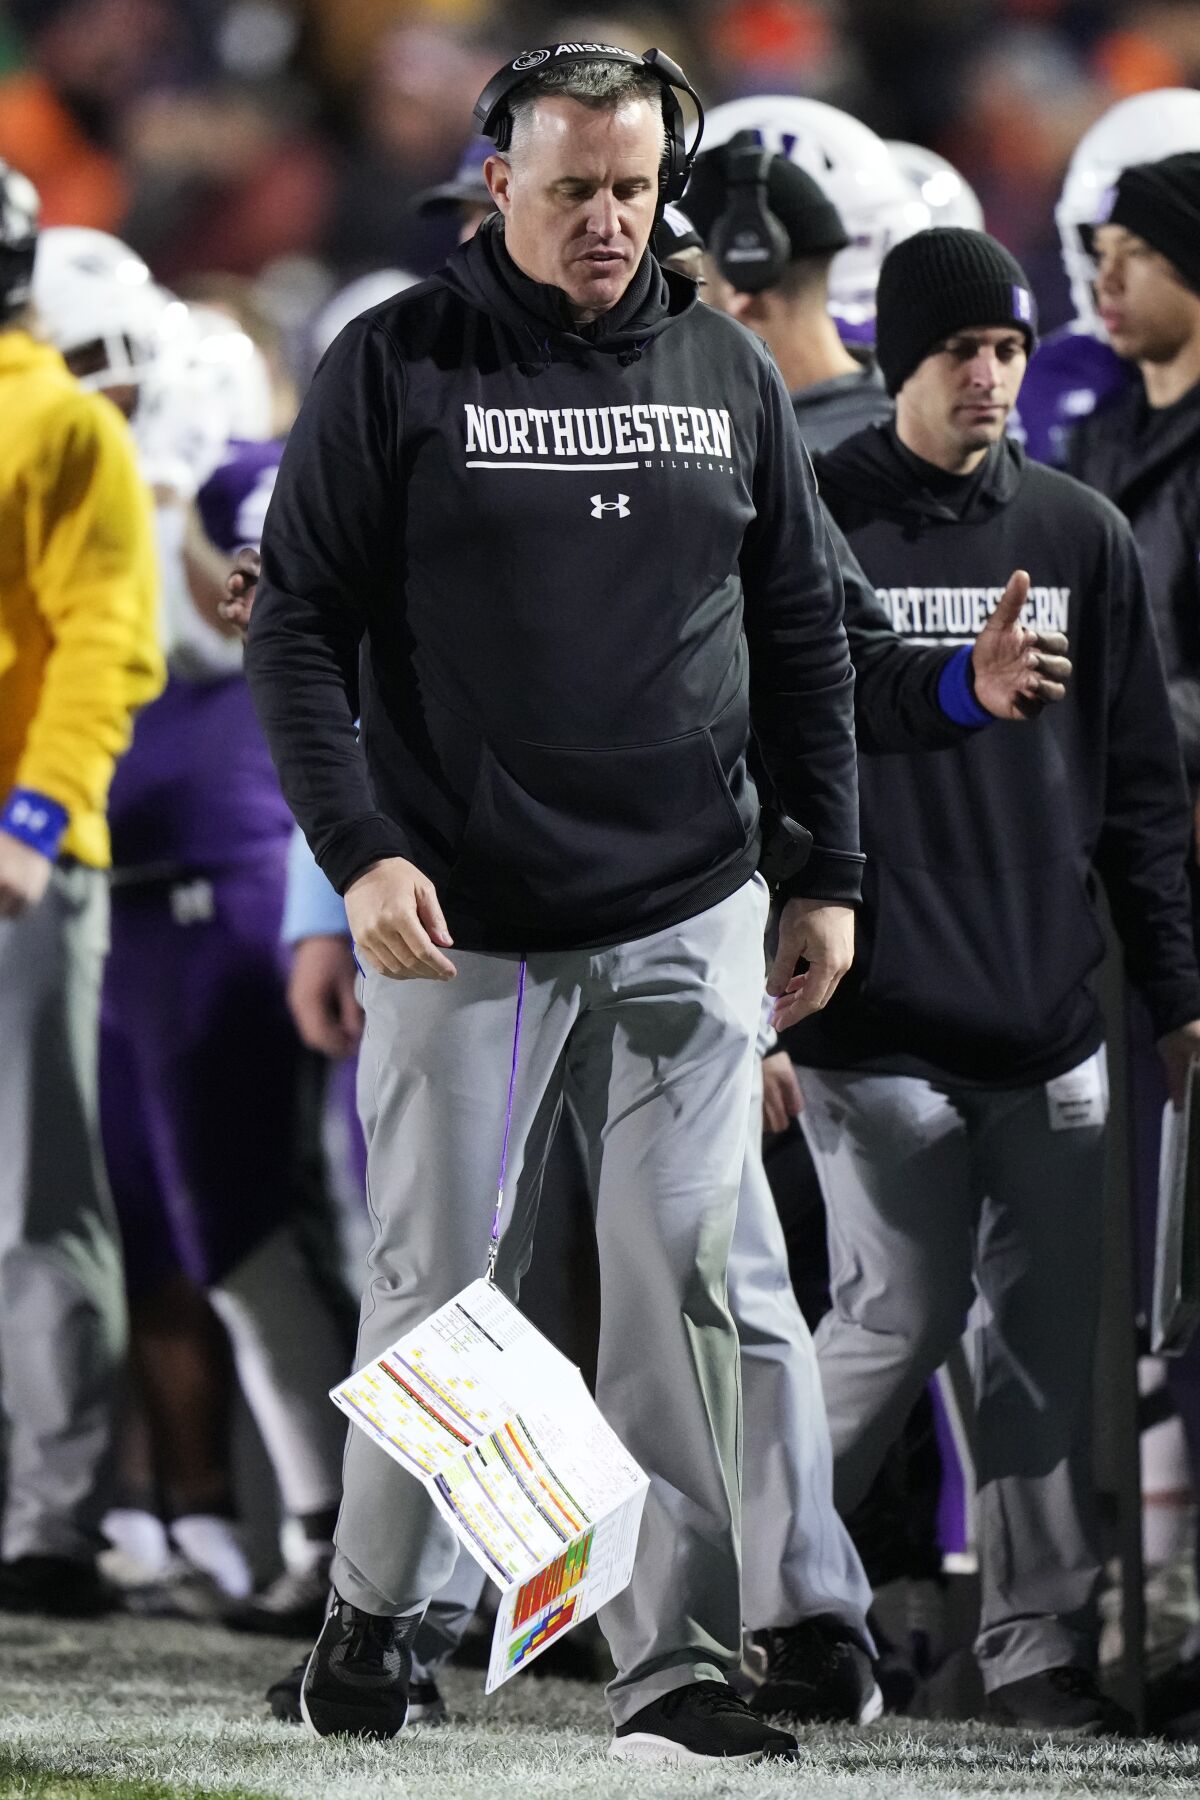 Northwestern head coach Pat Fitzgerald reacts as he looks down on the sideline during the second half of an NCAA college football game against Illinois in Evanston, Ill., Saturday, Nov. 26, 2022. Illinois won 41-3. (AP Photo/Nam Y. Huh)